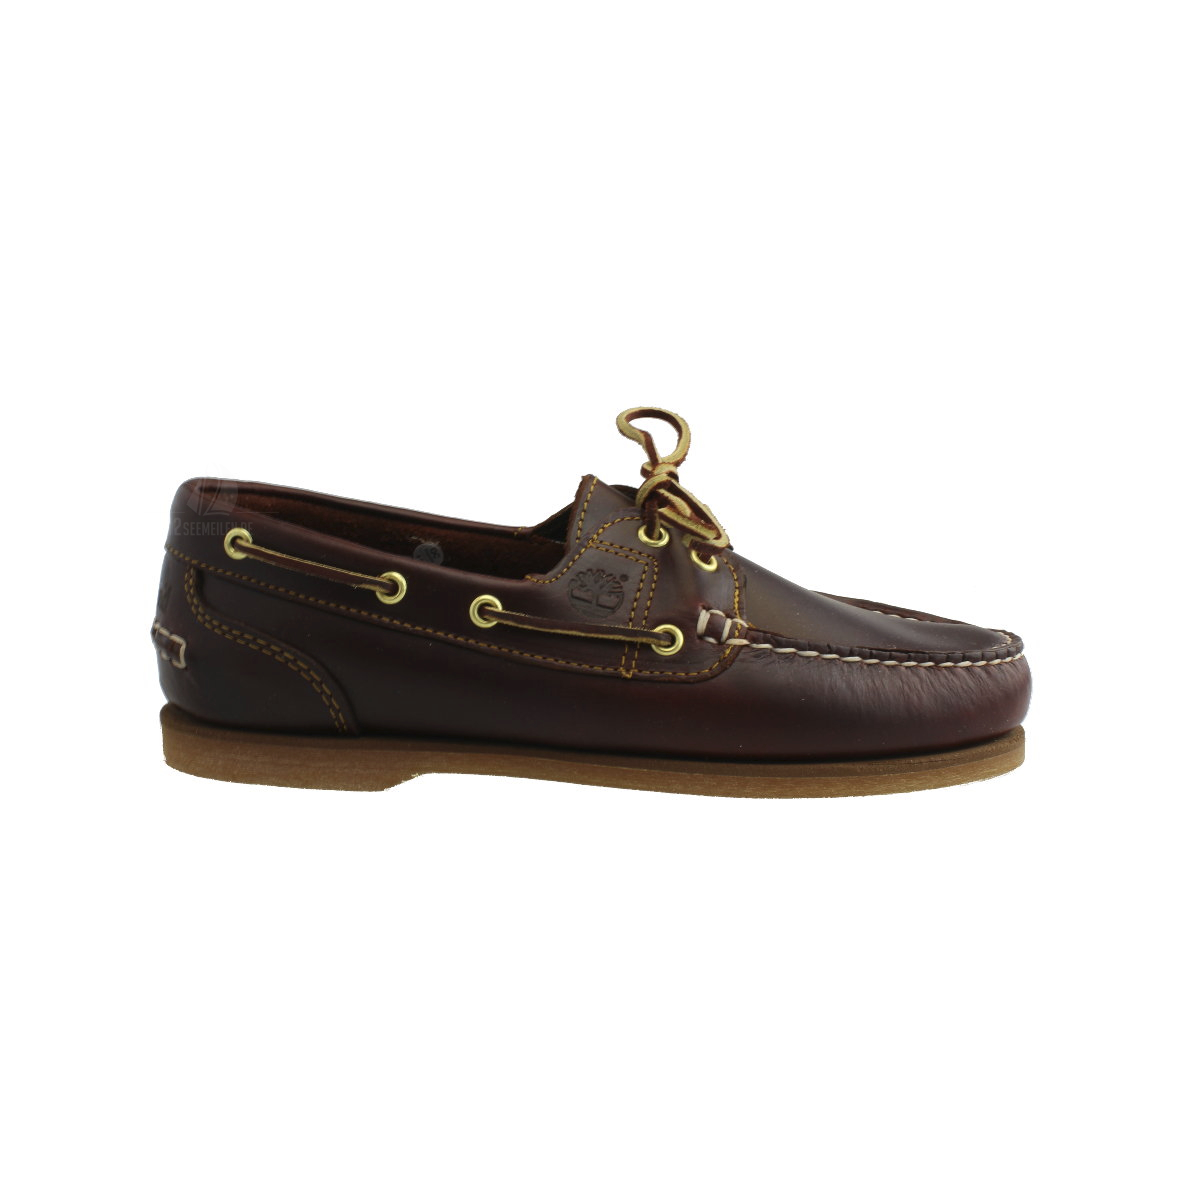 Timberland Classic Boat Amherst bootschoen dames rootbeer eu 39.5 ( us 8.5 )